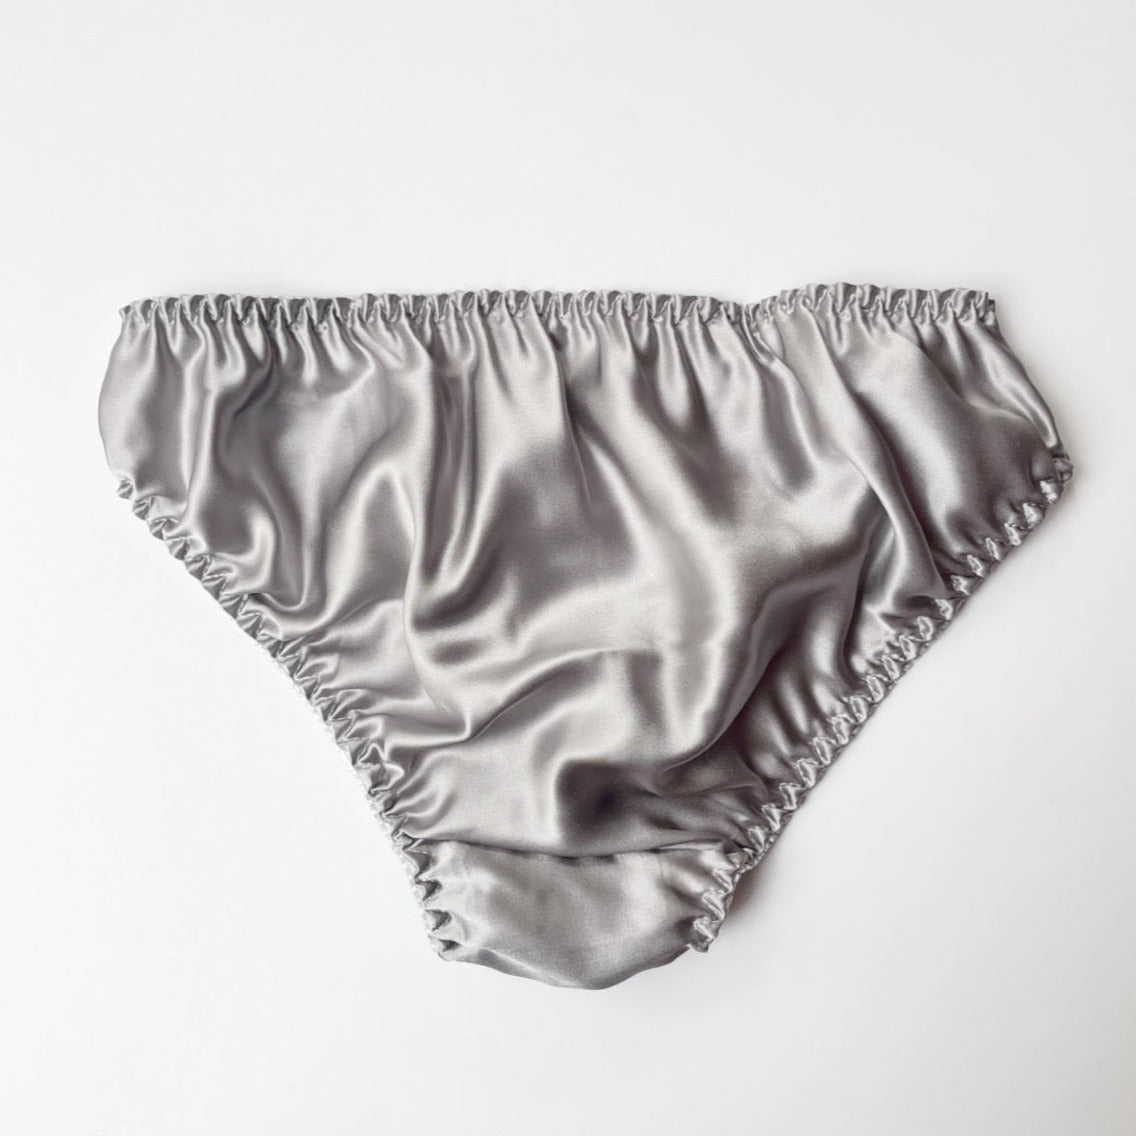 Lace pure silk underwear for women, silk panties, made in Canada silk lingerie and apparel